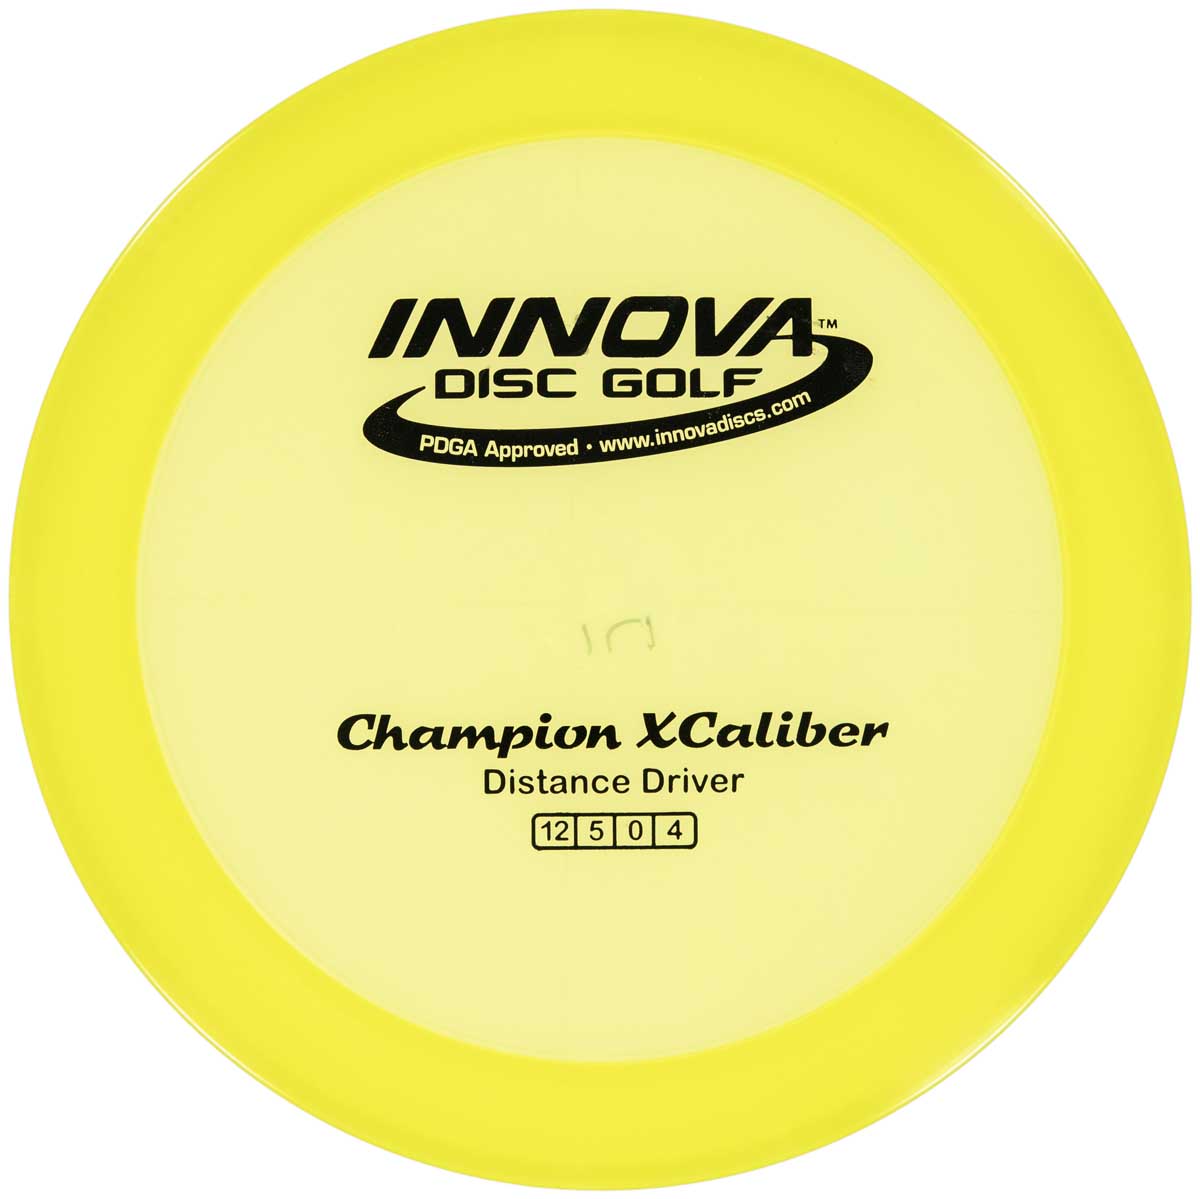 Champion XCaliber from Disc Golf United